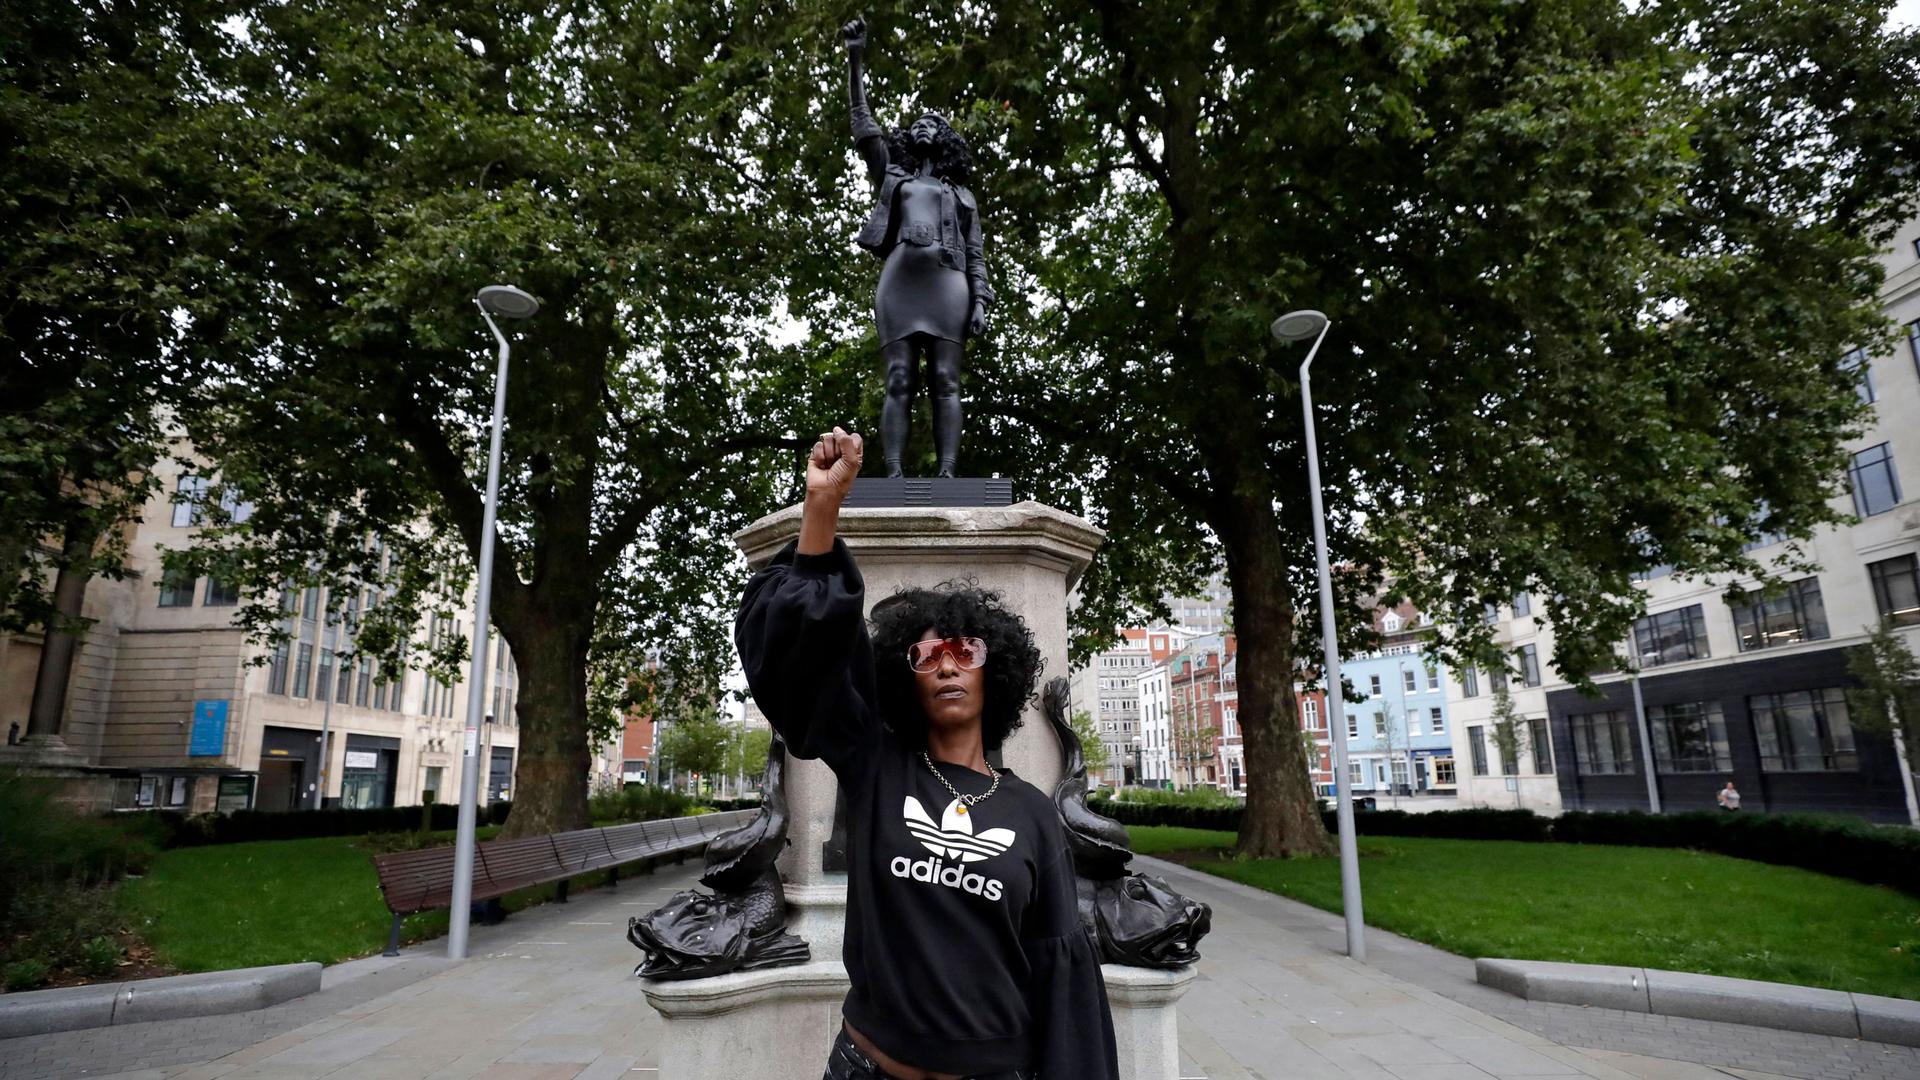 A woman wearing a dark jacket and sunglasses is shown standing in front of a statue of her with her hand raised.